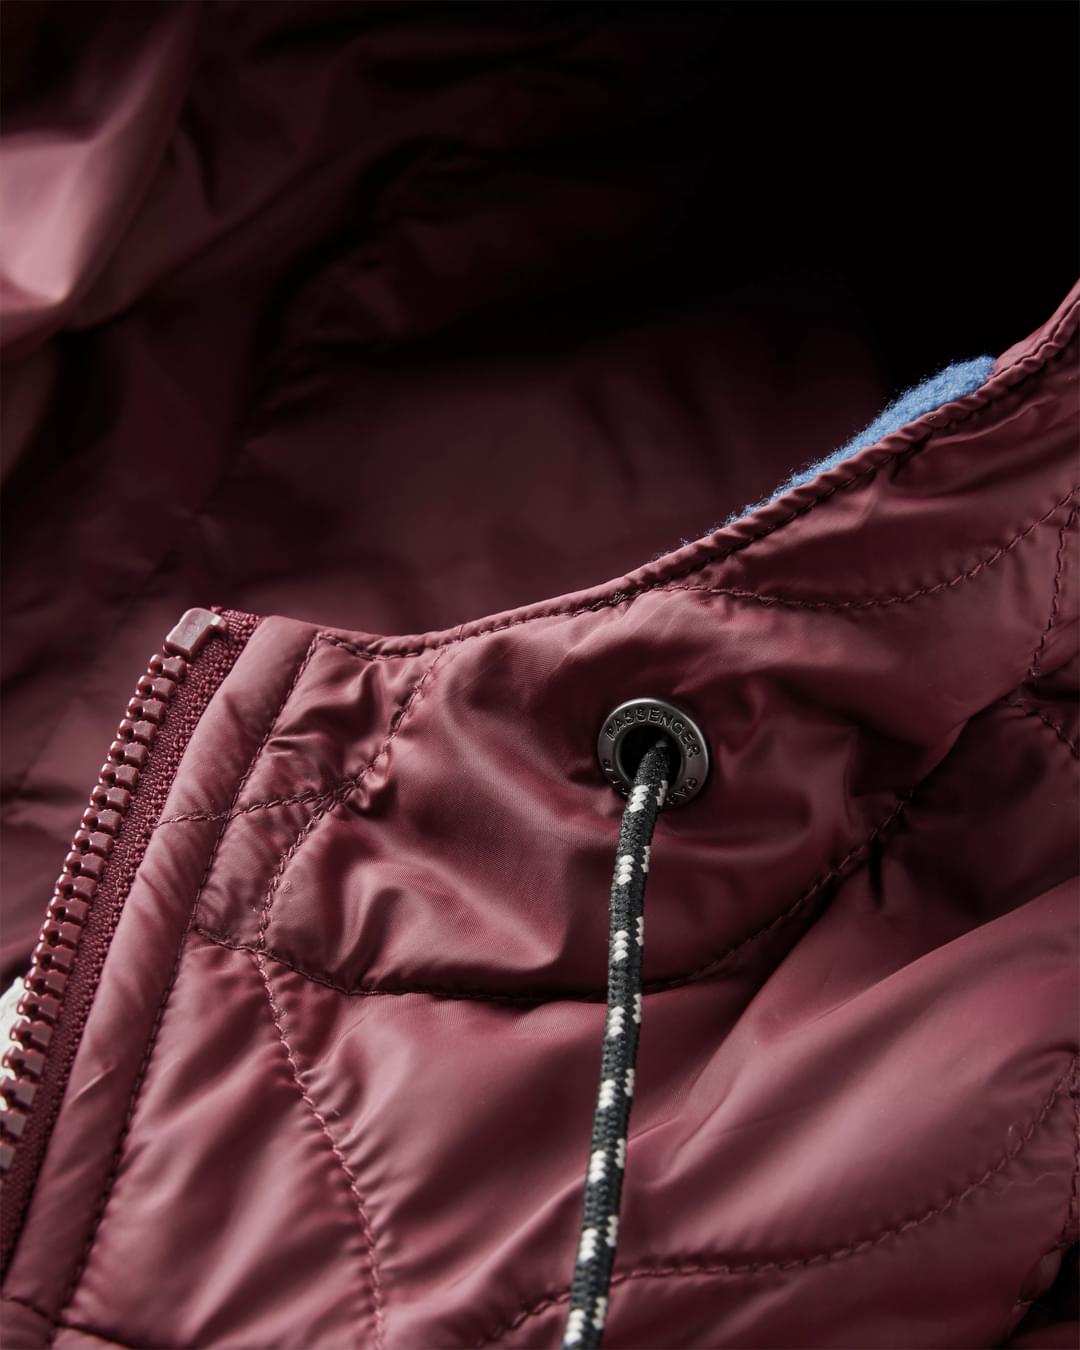 Flora 2.0 Long Insulated Jacket - Wine